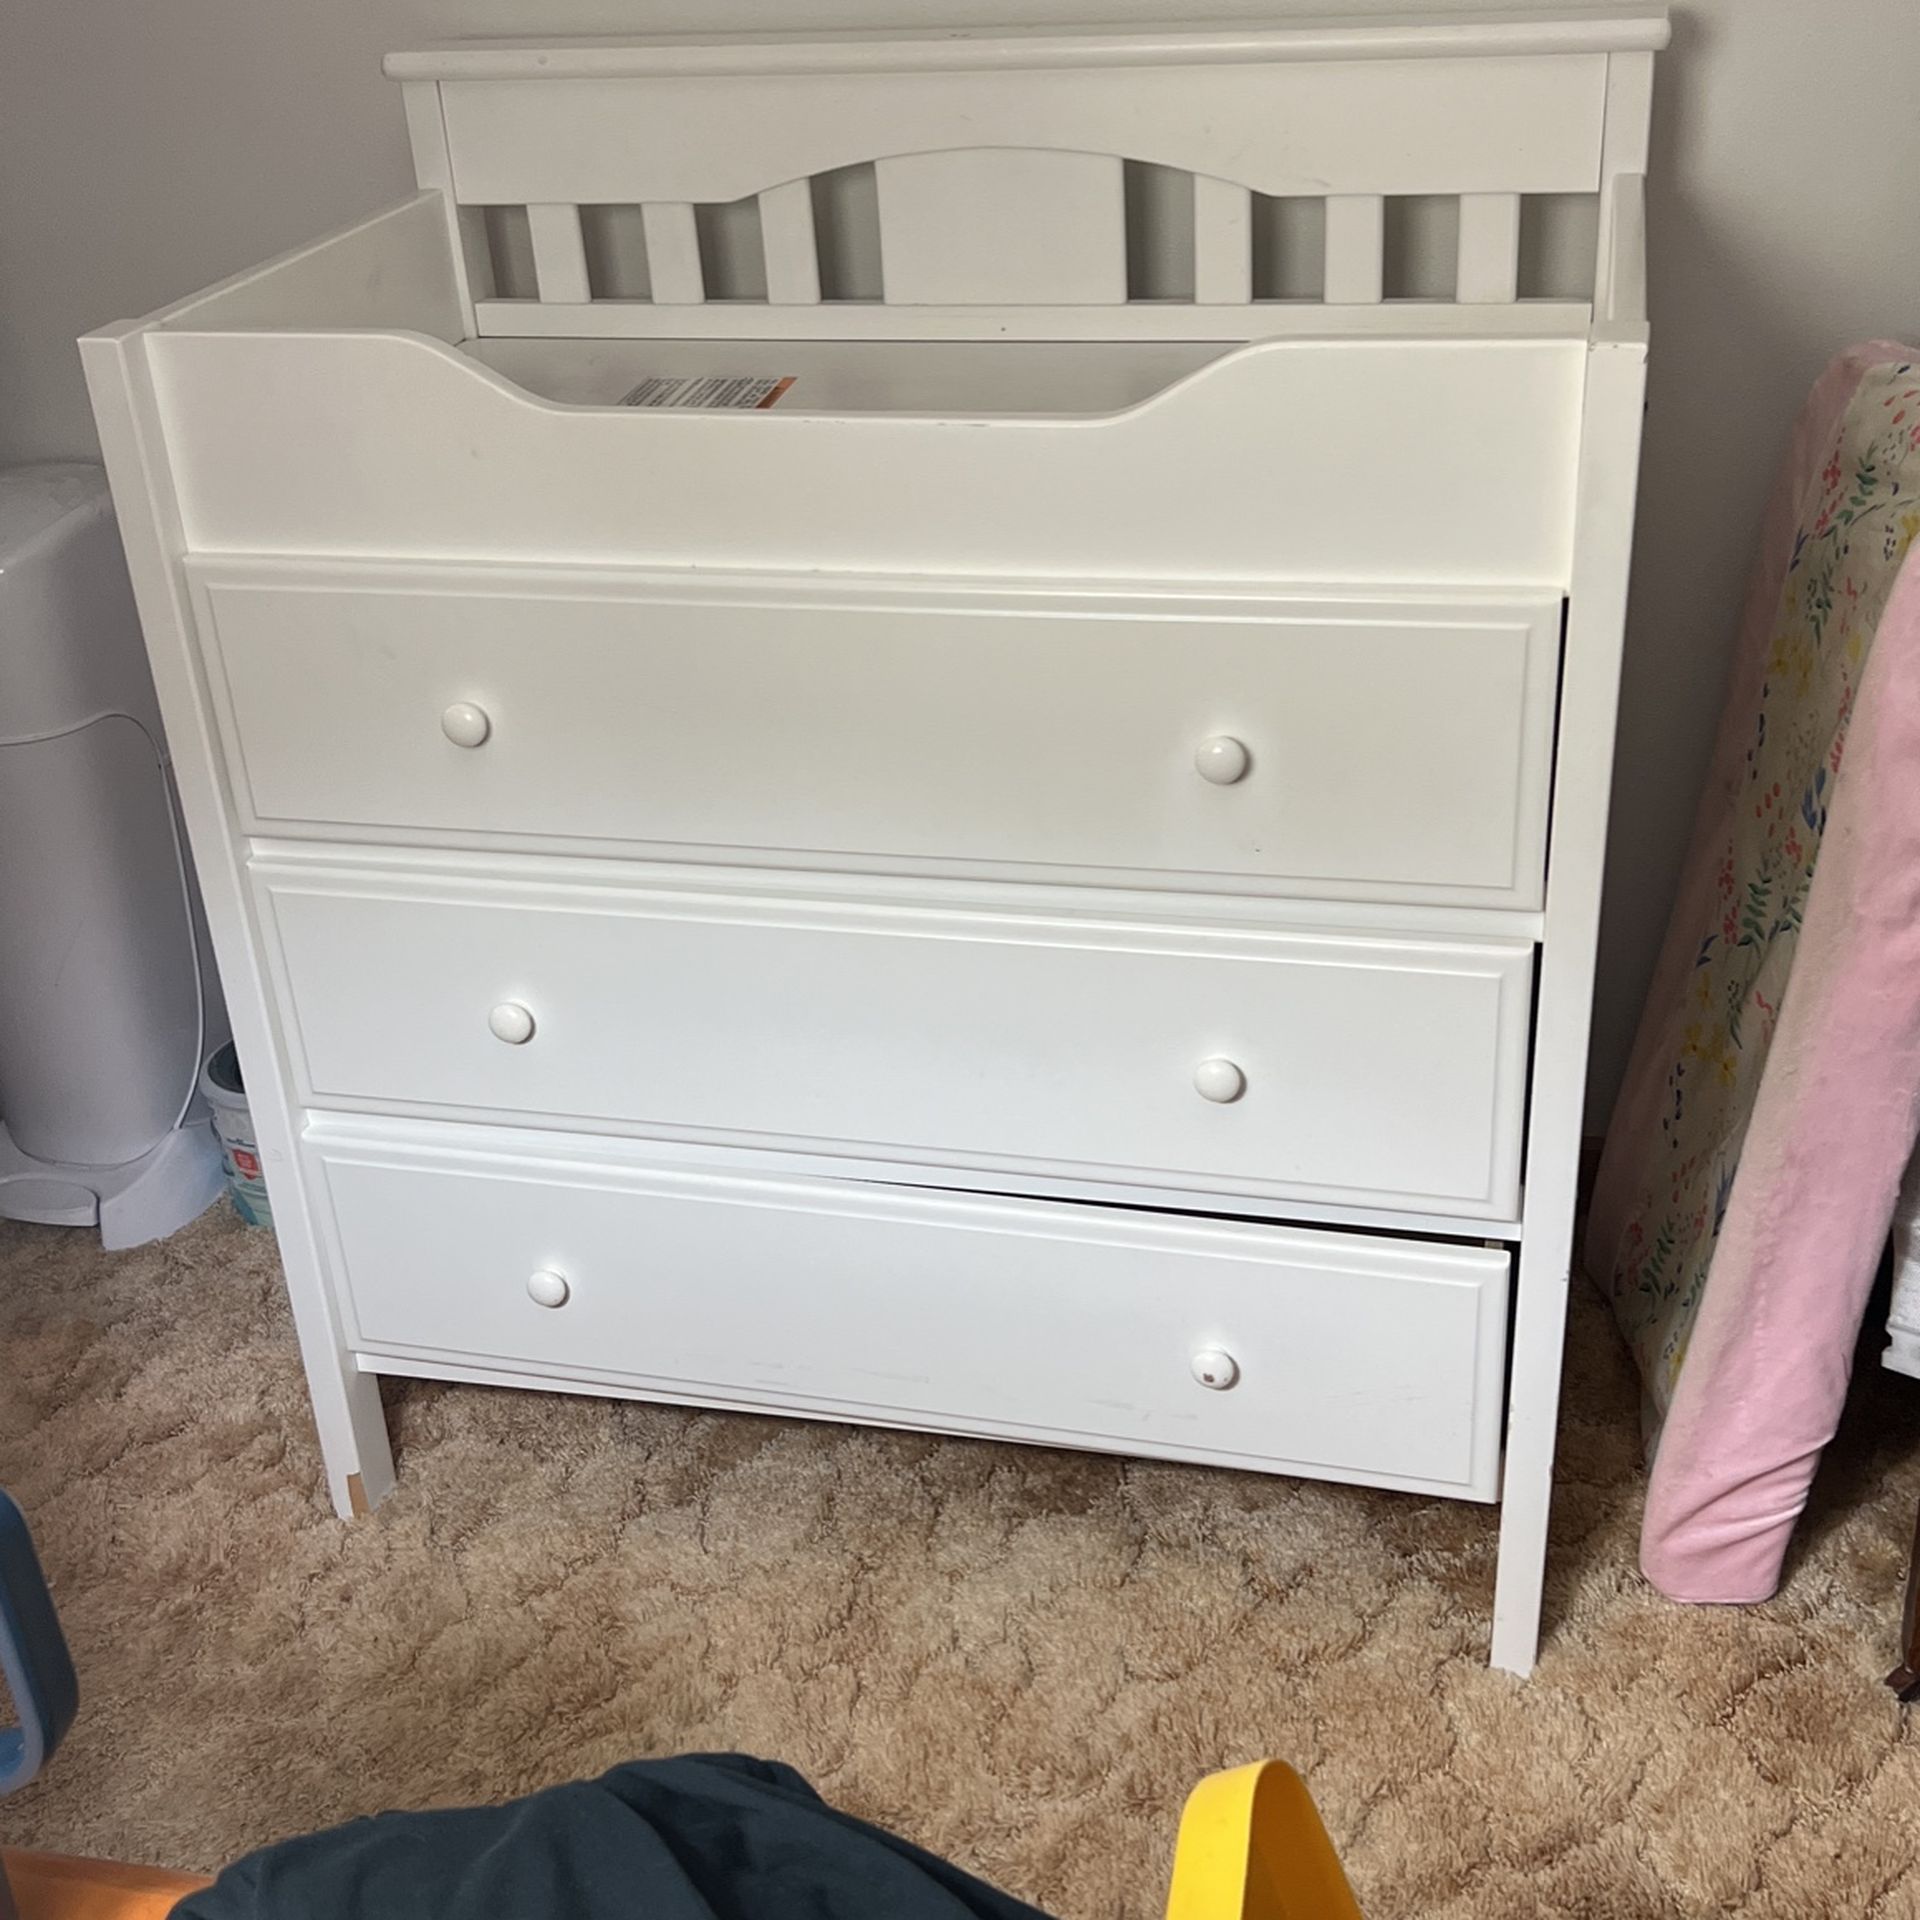 Baby changing table/dresser combo 